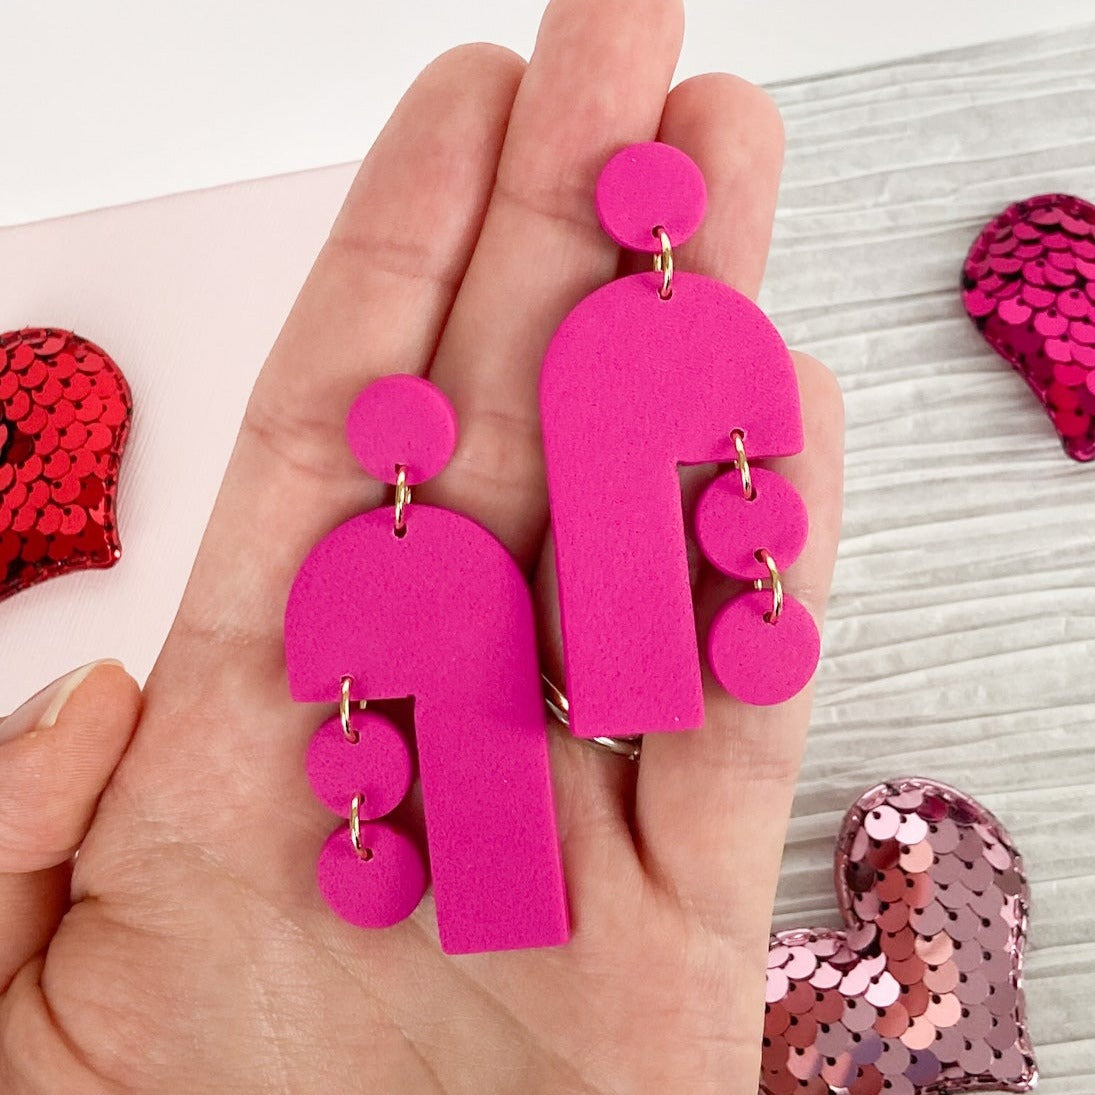 Toulouse Earrings in Bright Pink